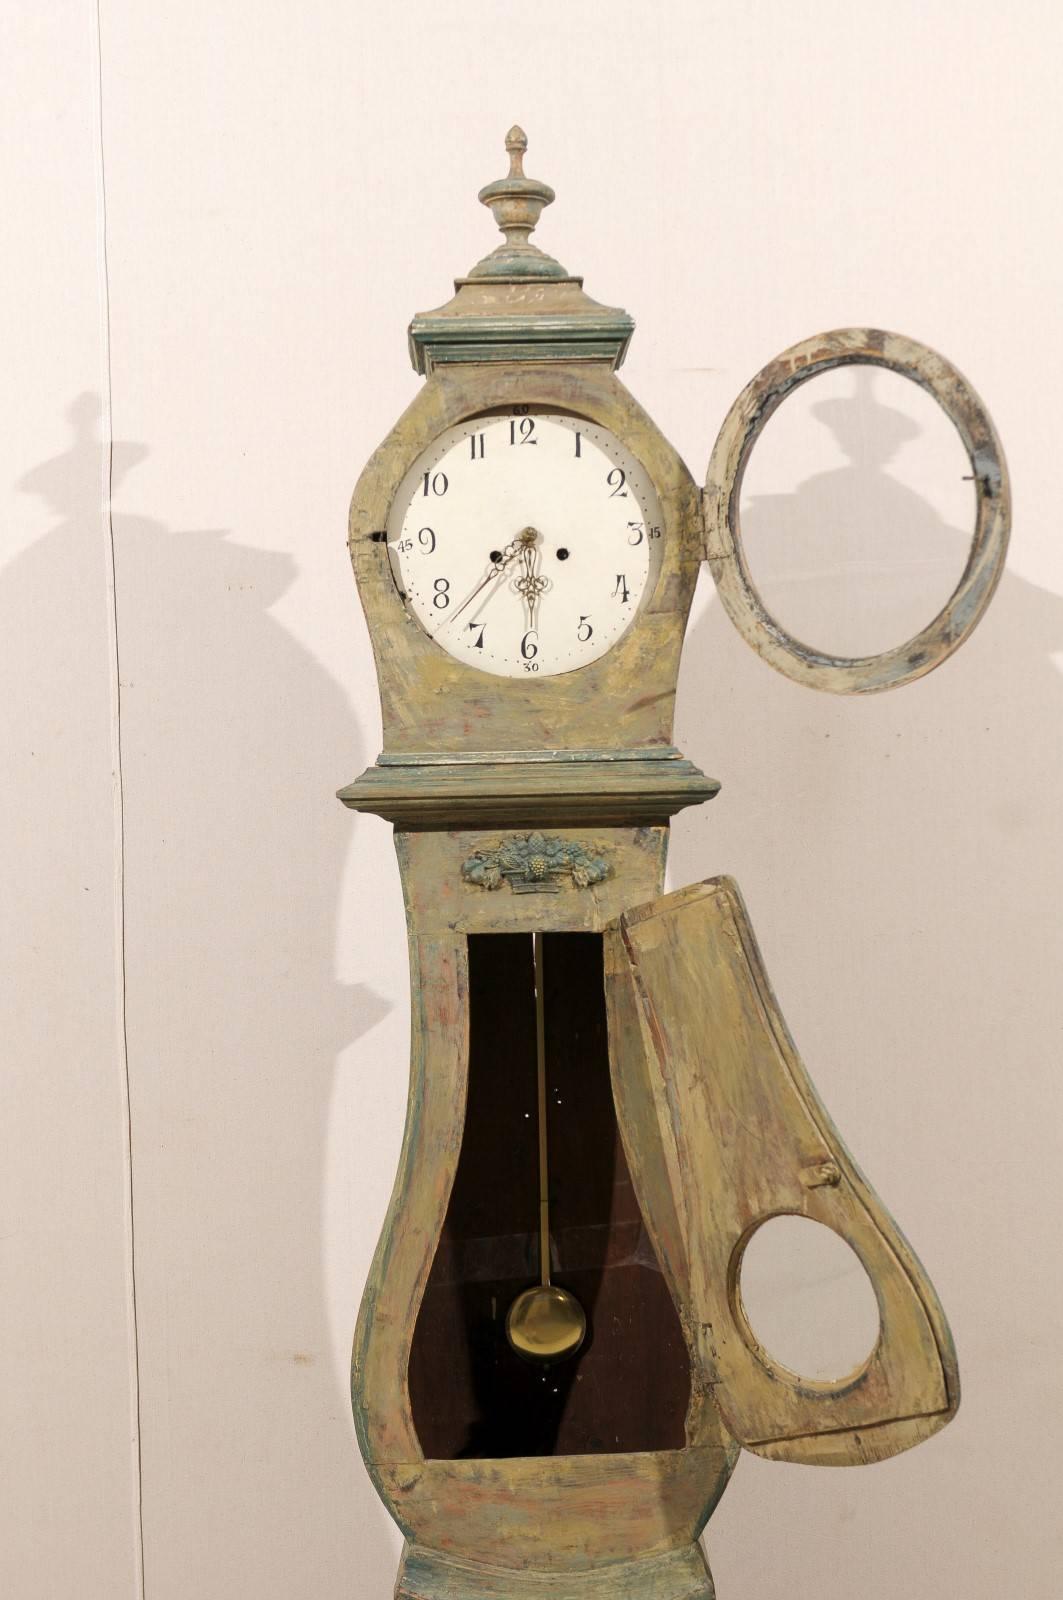 A Swedish 19th century clock. This painted wood clock features a nicely carved crest with an urn in its center. The neck is decorated with an exquisite fruit basket motif in its center. This clock retains it's original metal face, hands and